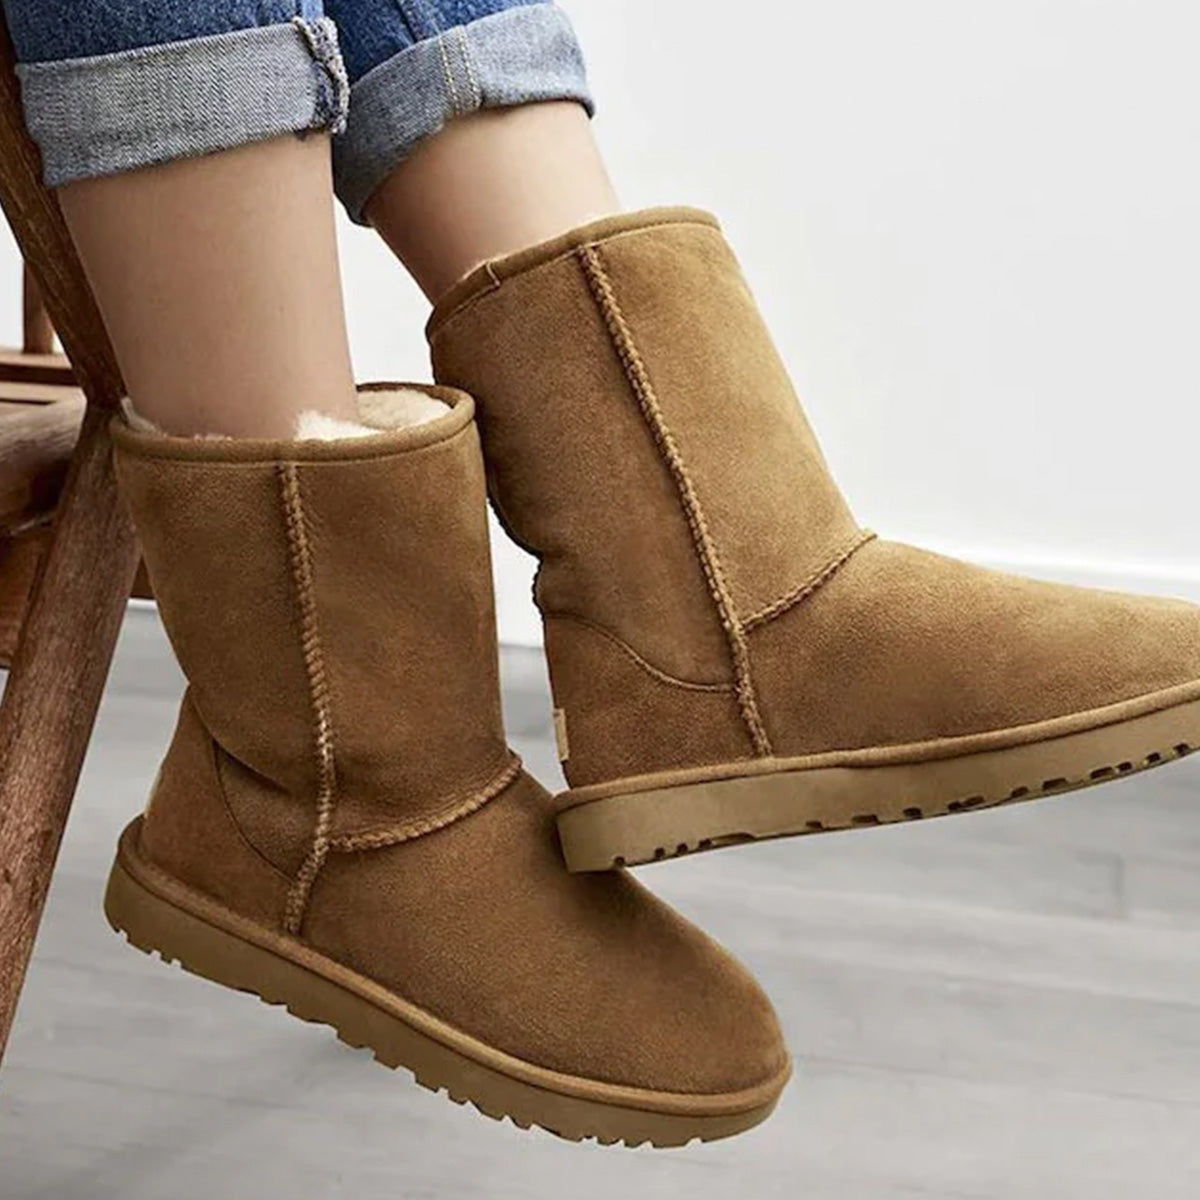 Do UGG Boots Stretch Over Time?